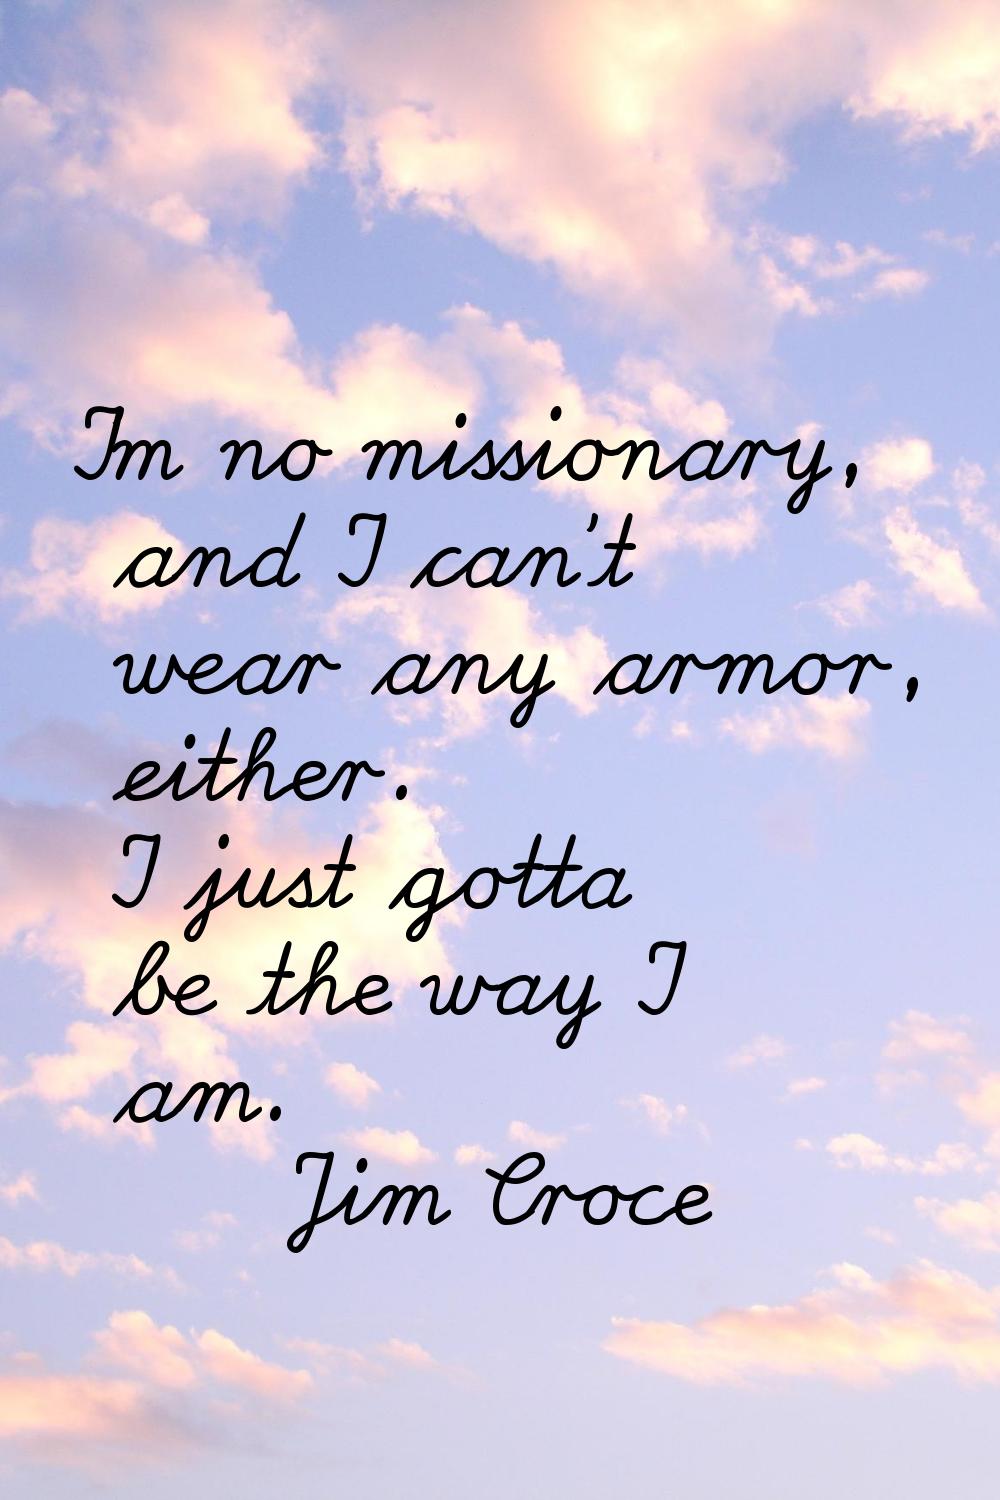 I'm no missionary, and I can't wear any armor, either. I just gotta be the way I am.